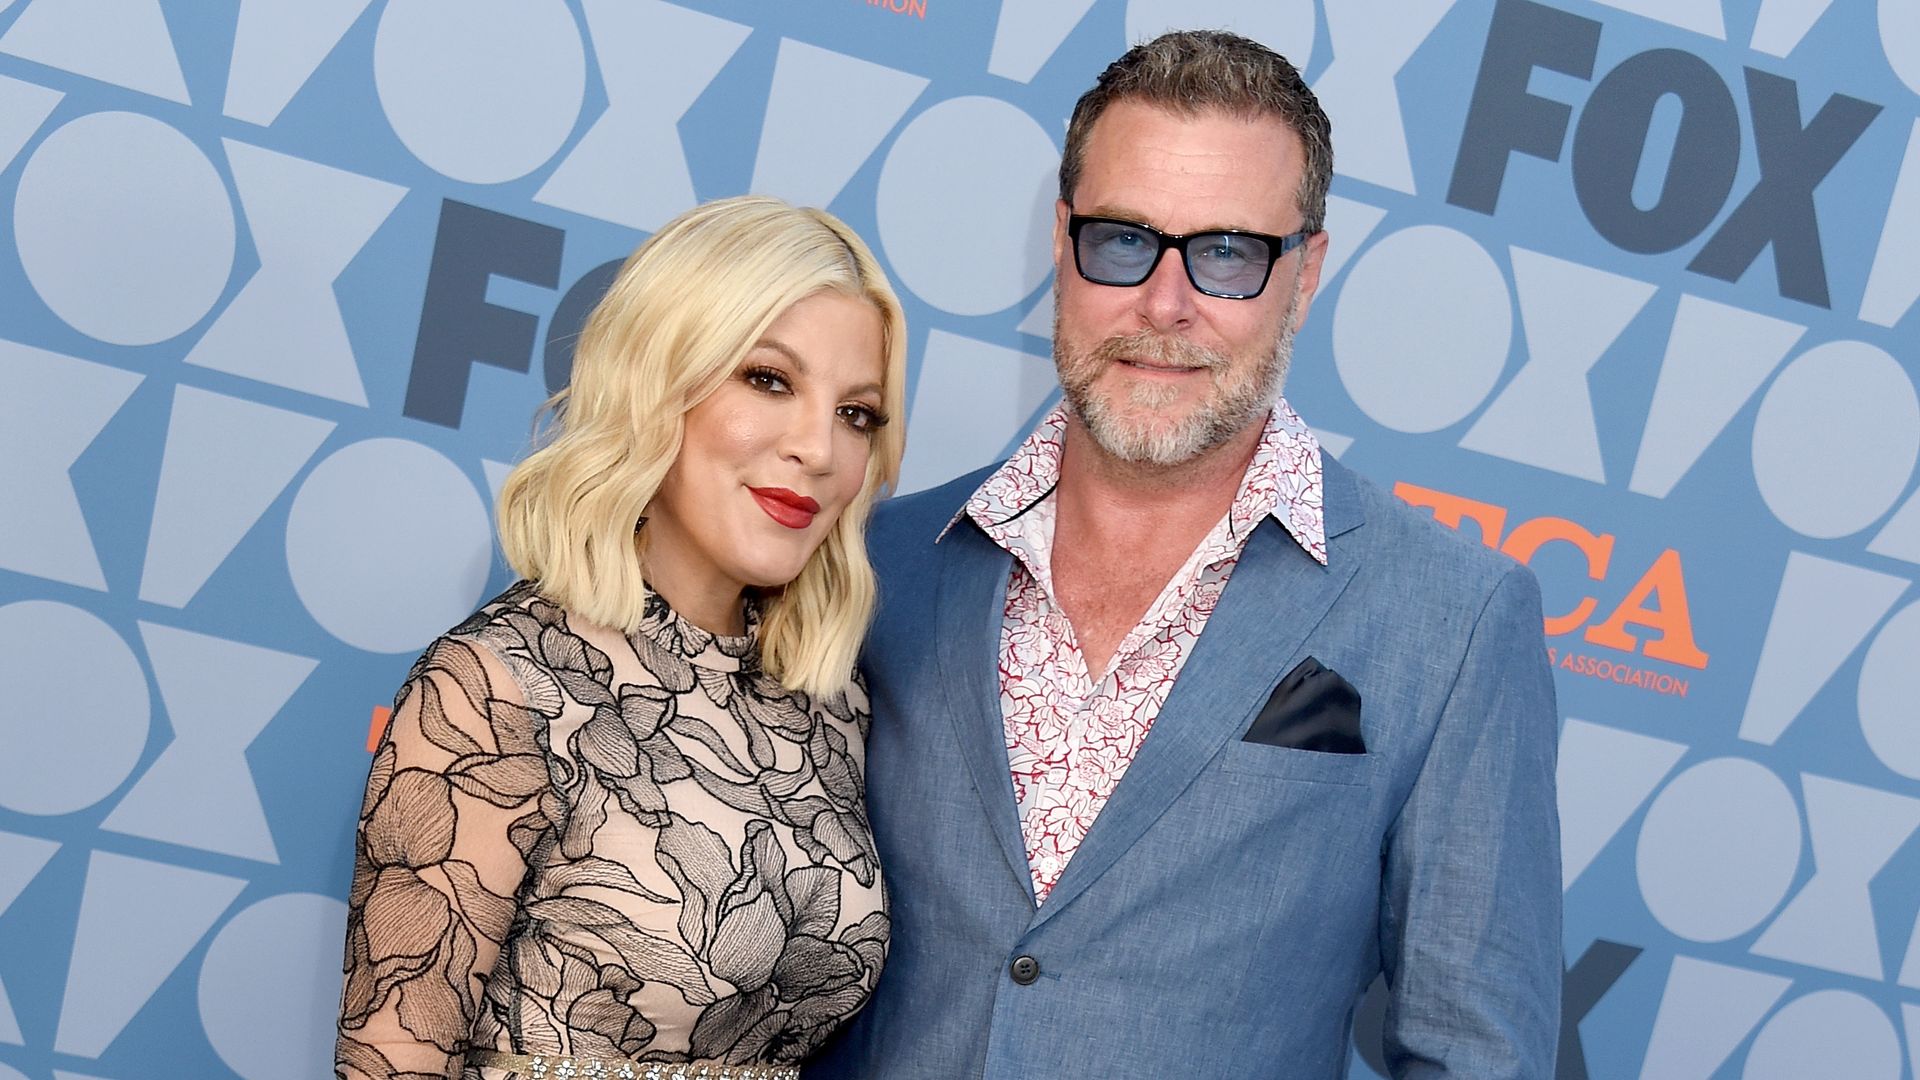 Tori Spelling 'wasn't in love' with Dean McDermott as she reveals the only man who broke her heart